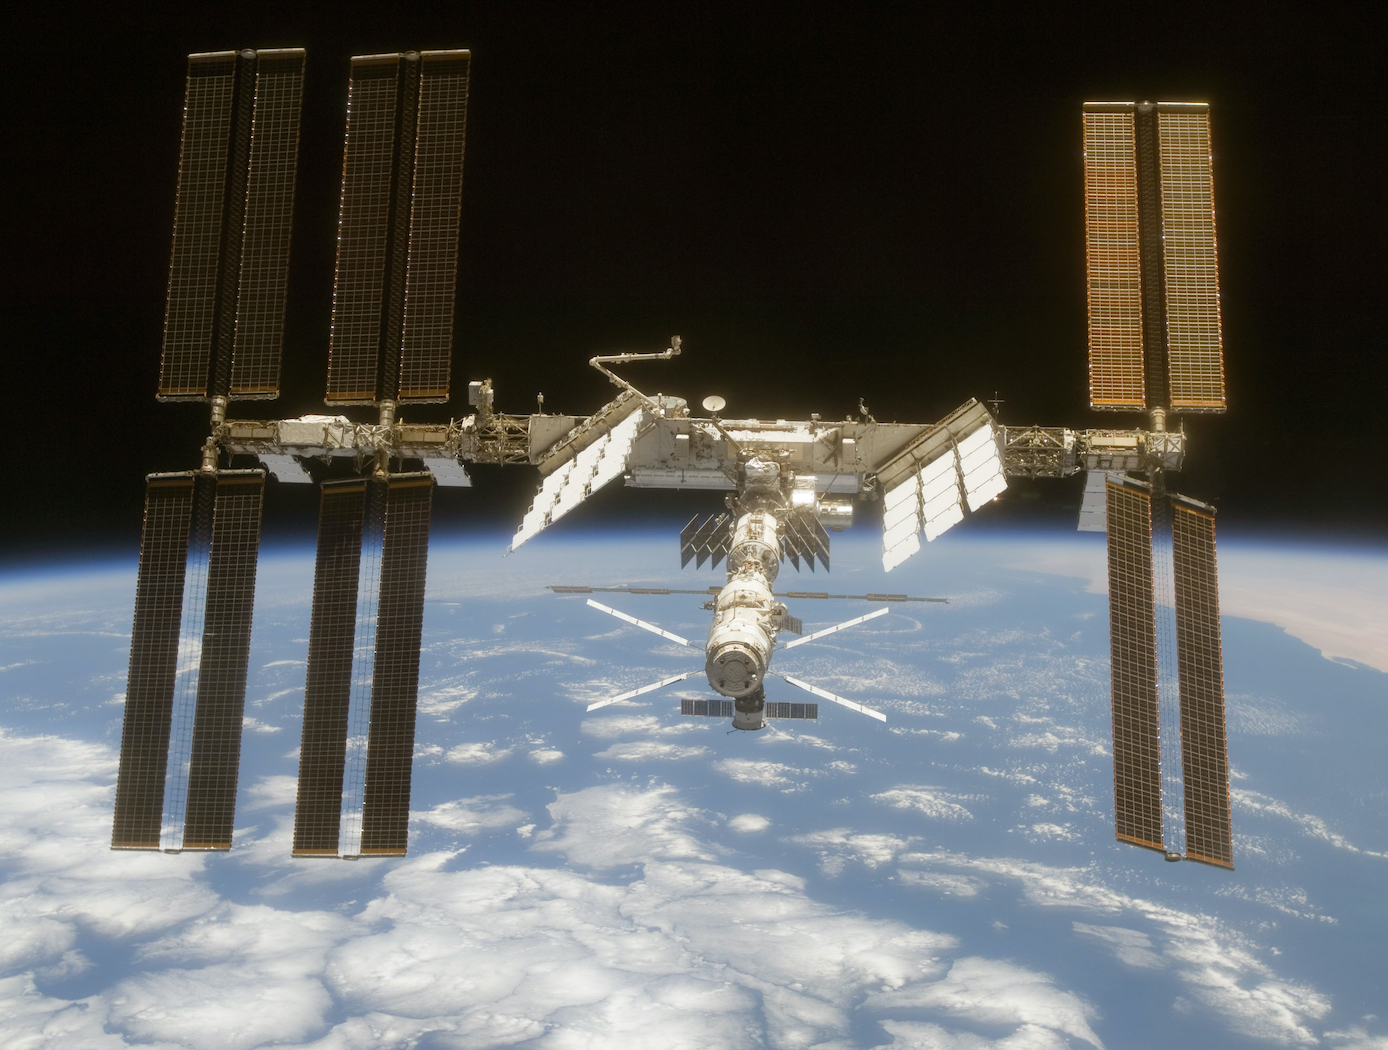 ISS as seen by STS-124; Photo Credit: NASA on the Commons, https://www.flickr.com/photos/nasacommons/35201127816/in/album-72157648186433655/